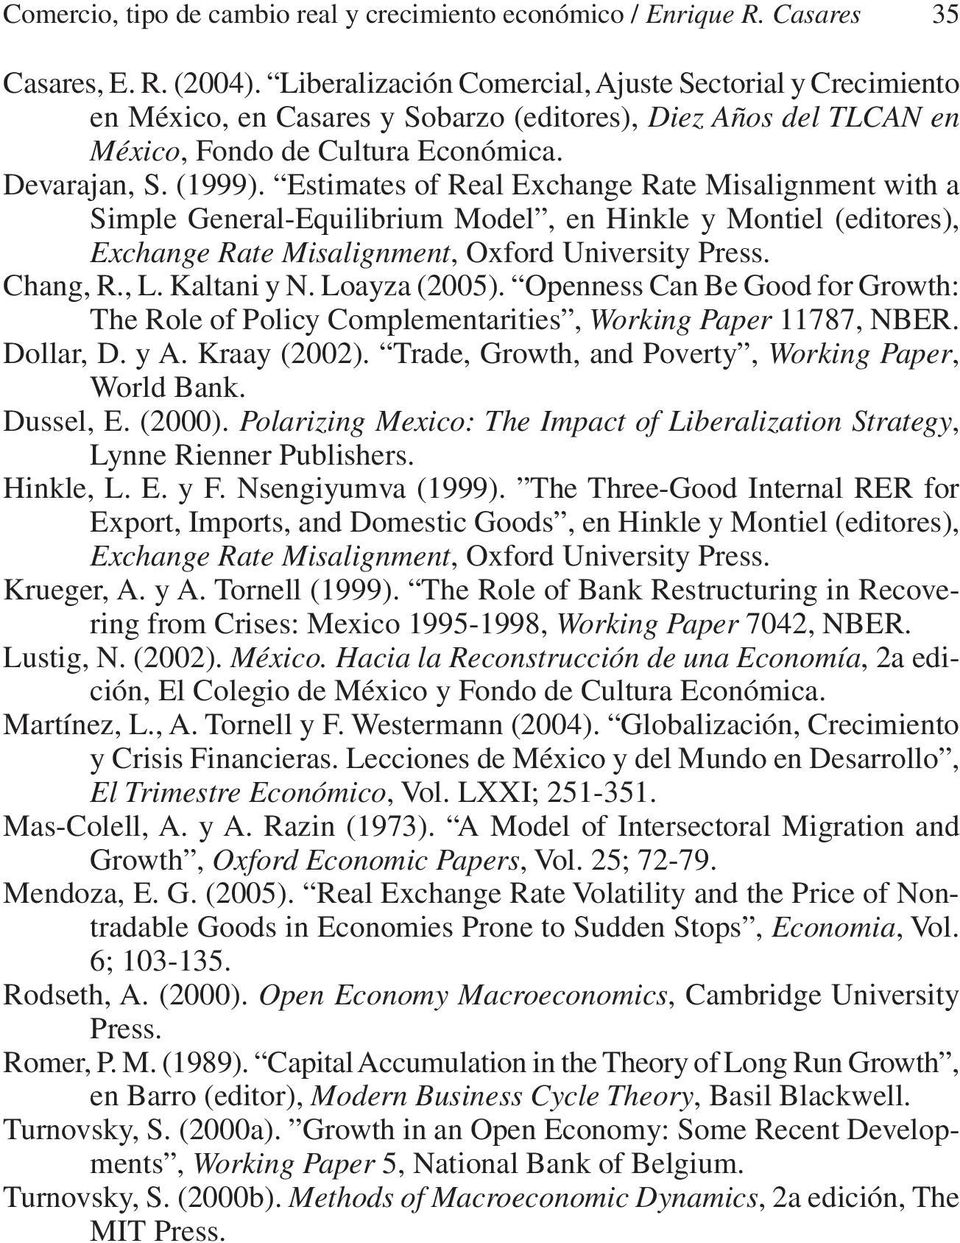 Estimates of Real Exchange Rate Misalignment with a Simle General-Equilibrium Model, en Hinkle y Montiel (editores), Exchange Rate Misalignment, Oxford University Press. Chang, R., L. Kaltani y.